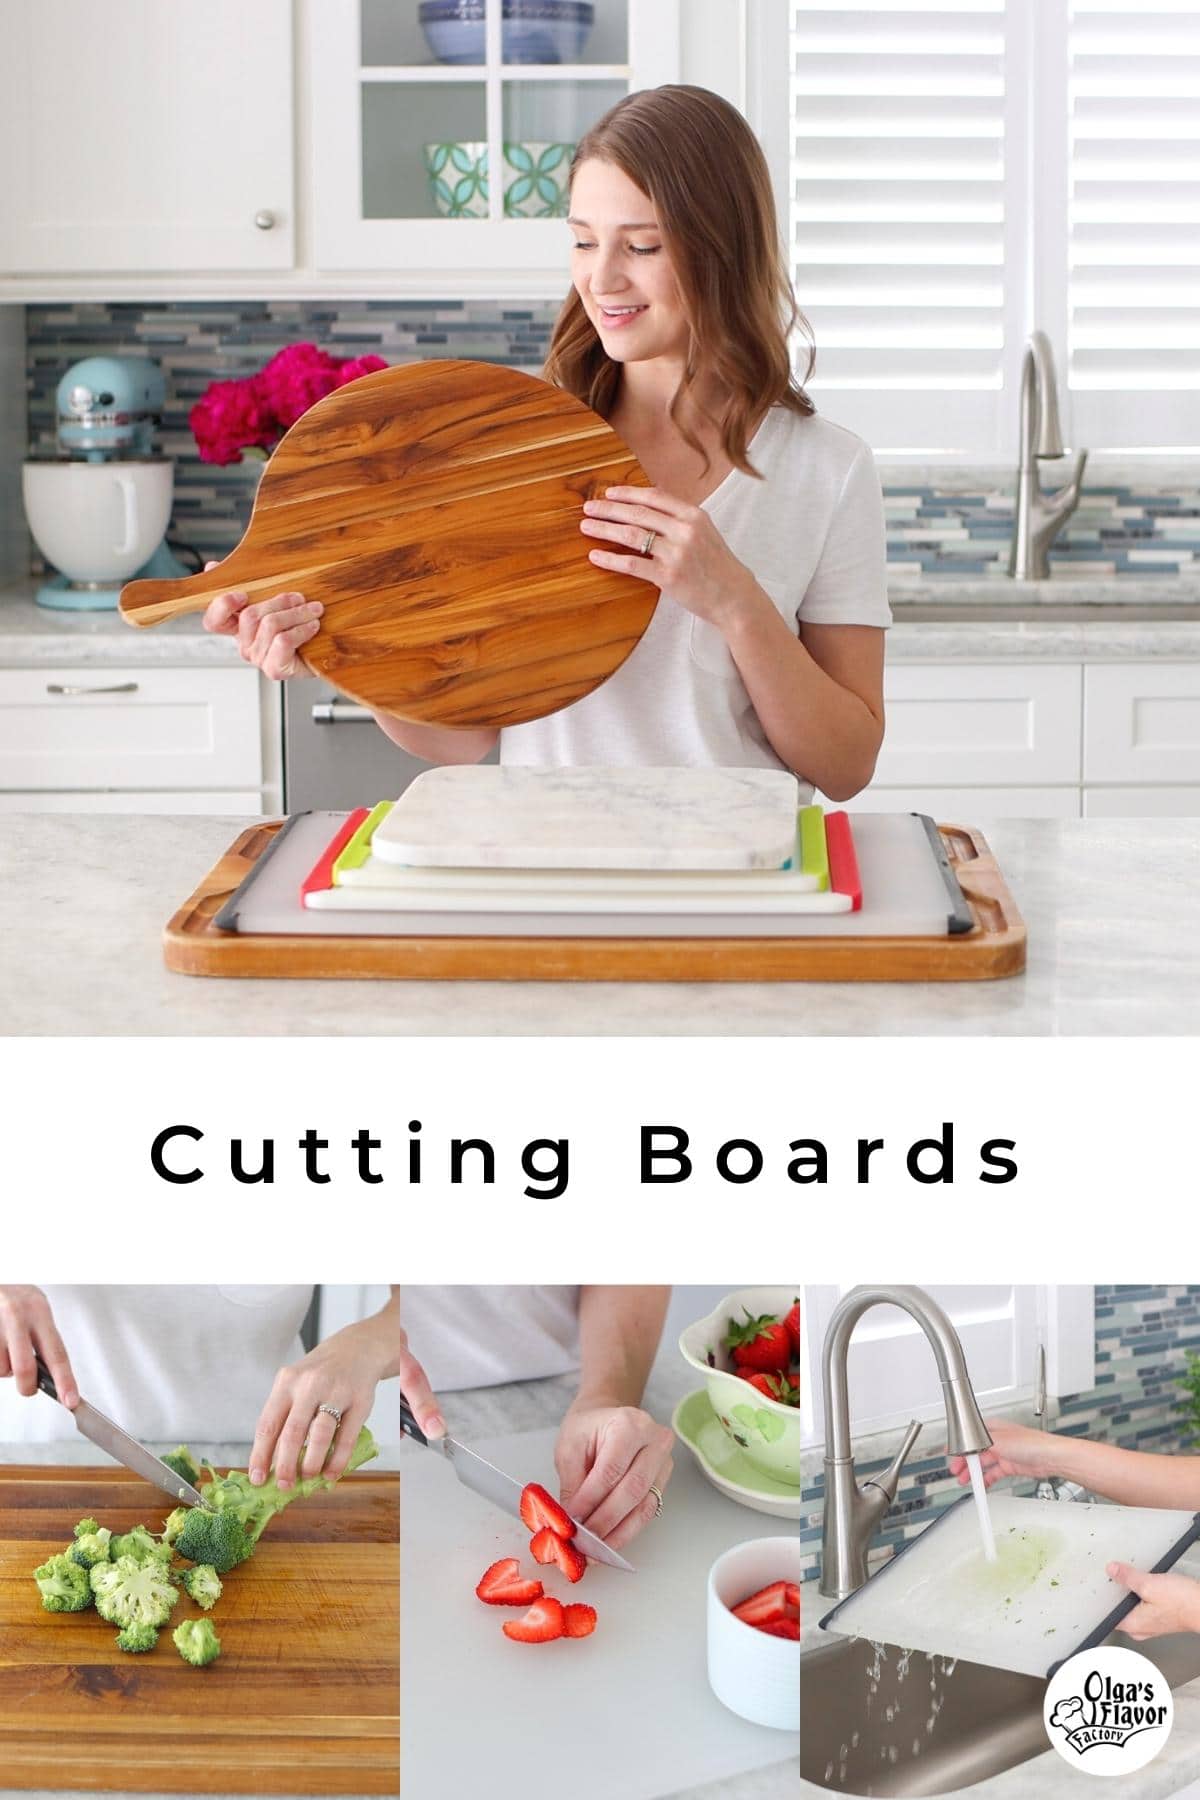 https://www.olgasflavorfactory.com/wp-content/uploads/2022/06/Cutting-Boards-1.jpg